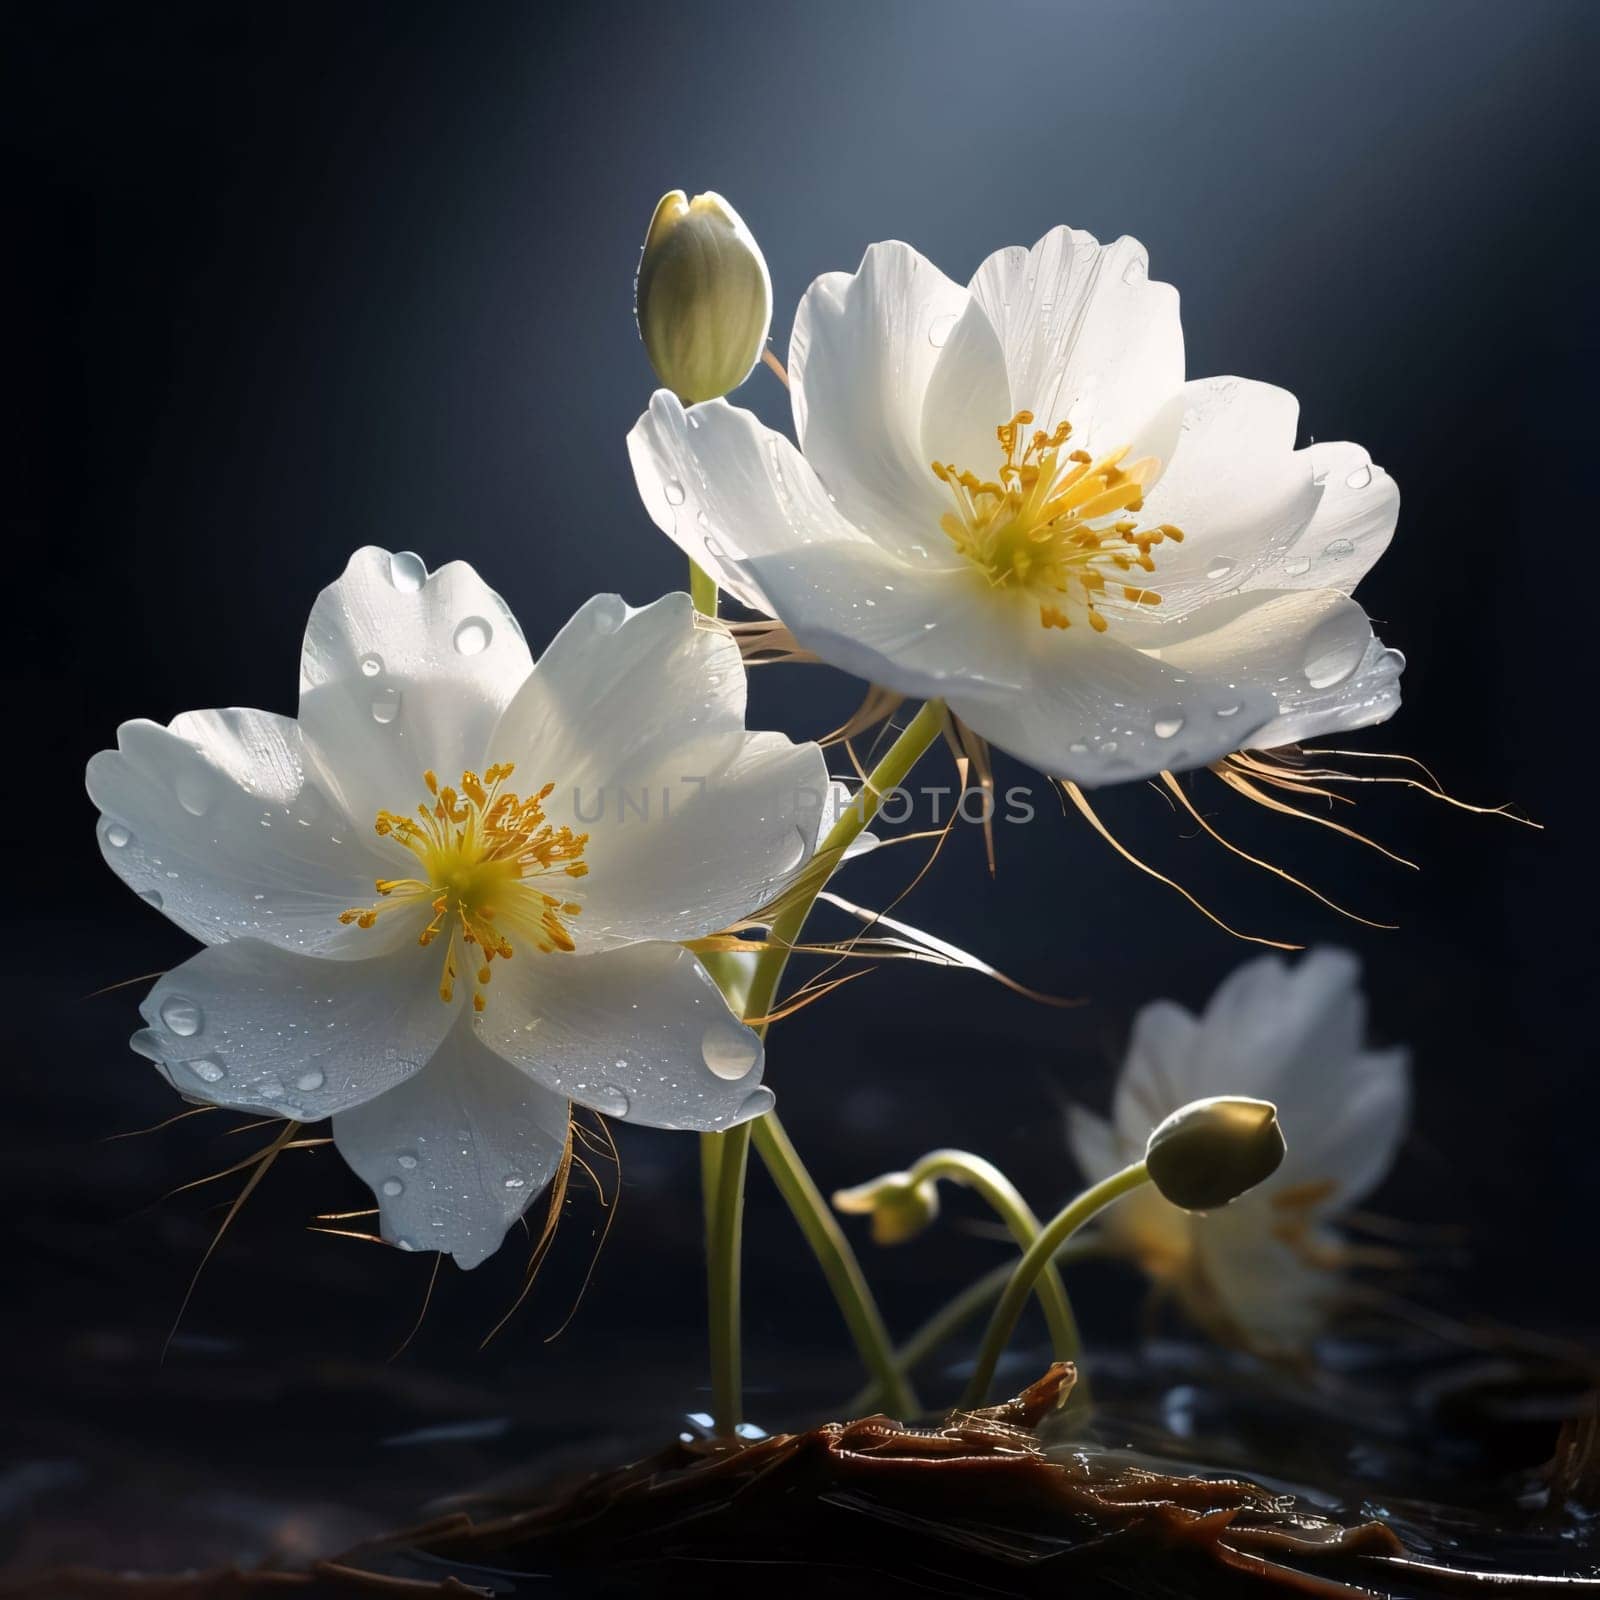 Two white flowers with petals and drops of dew, water and buds on a dark background. Flowering flowers, a symbol of spring, new life. A joyful time of nature waking up to life.